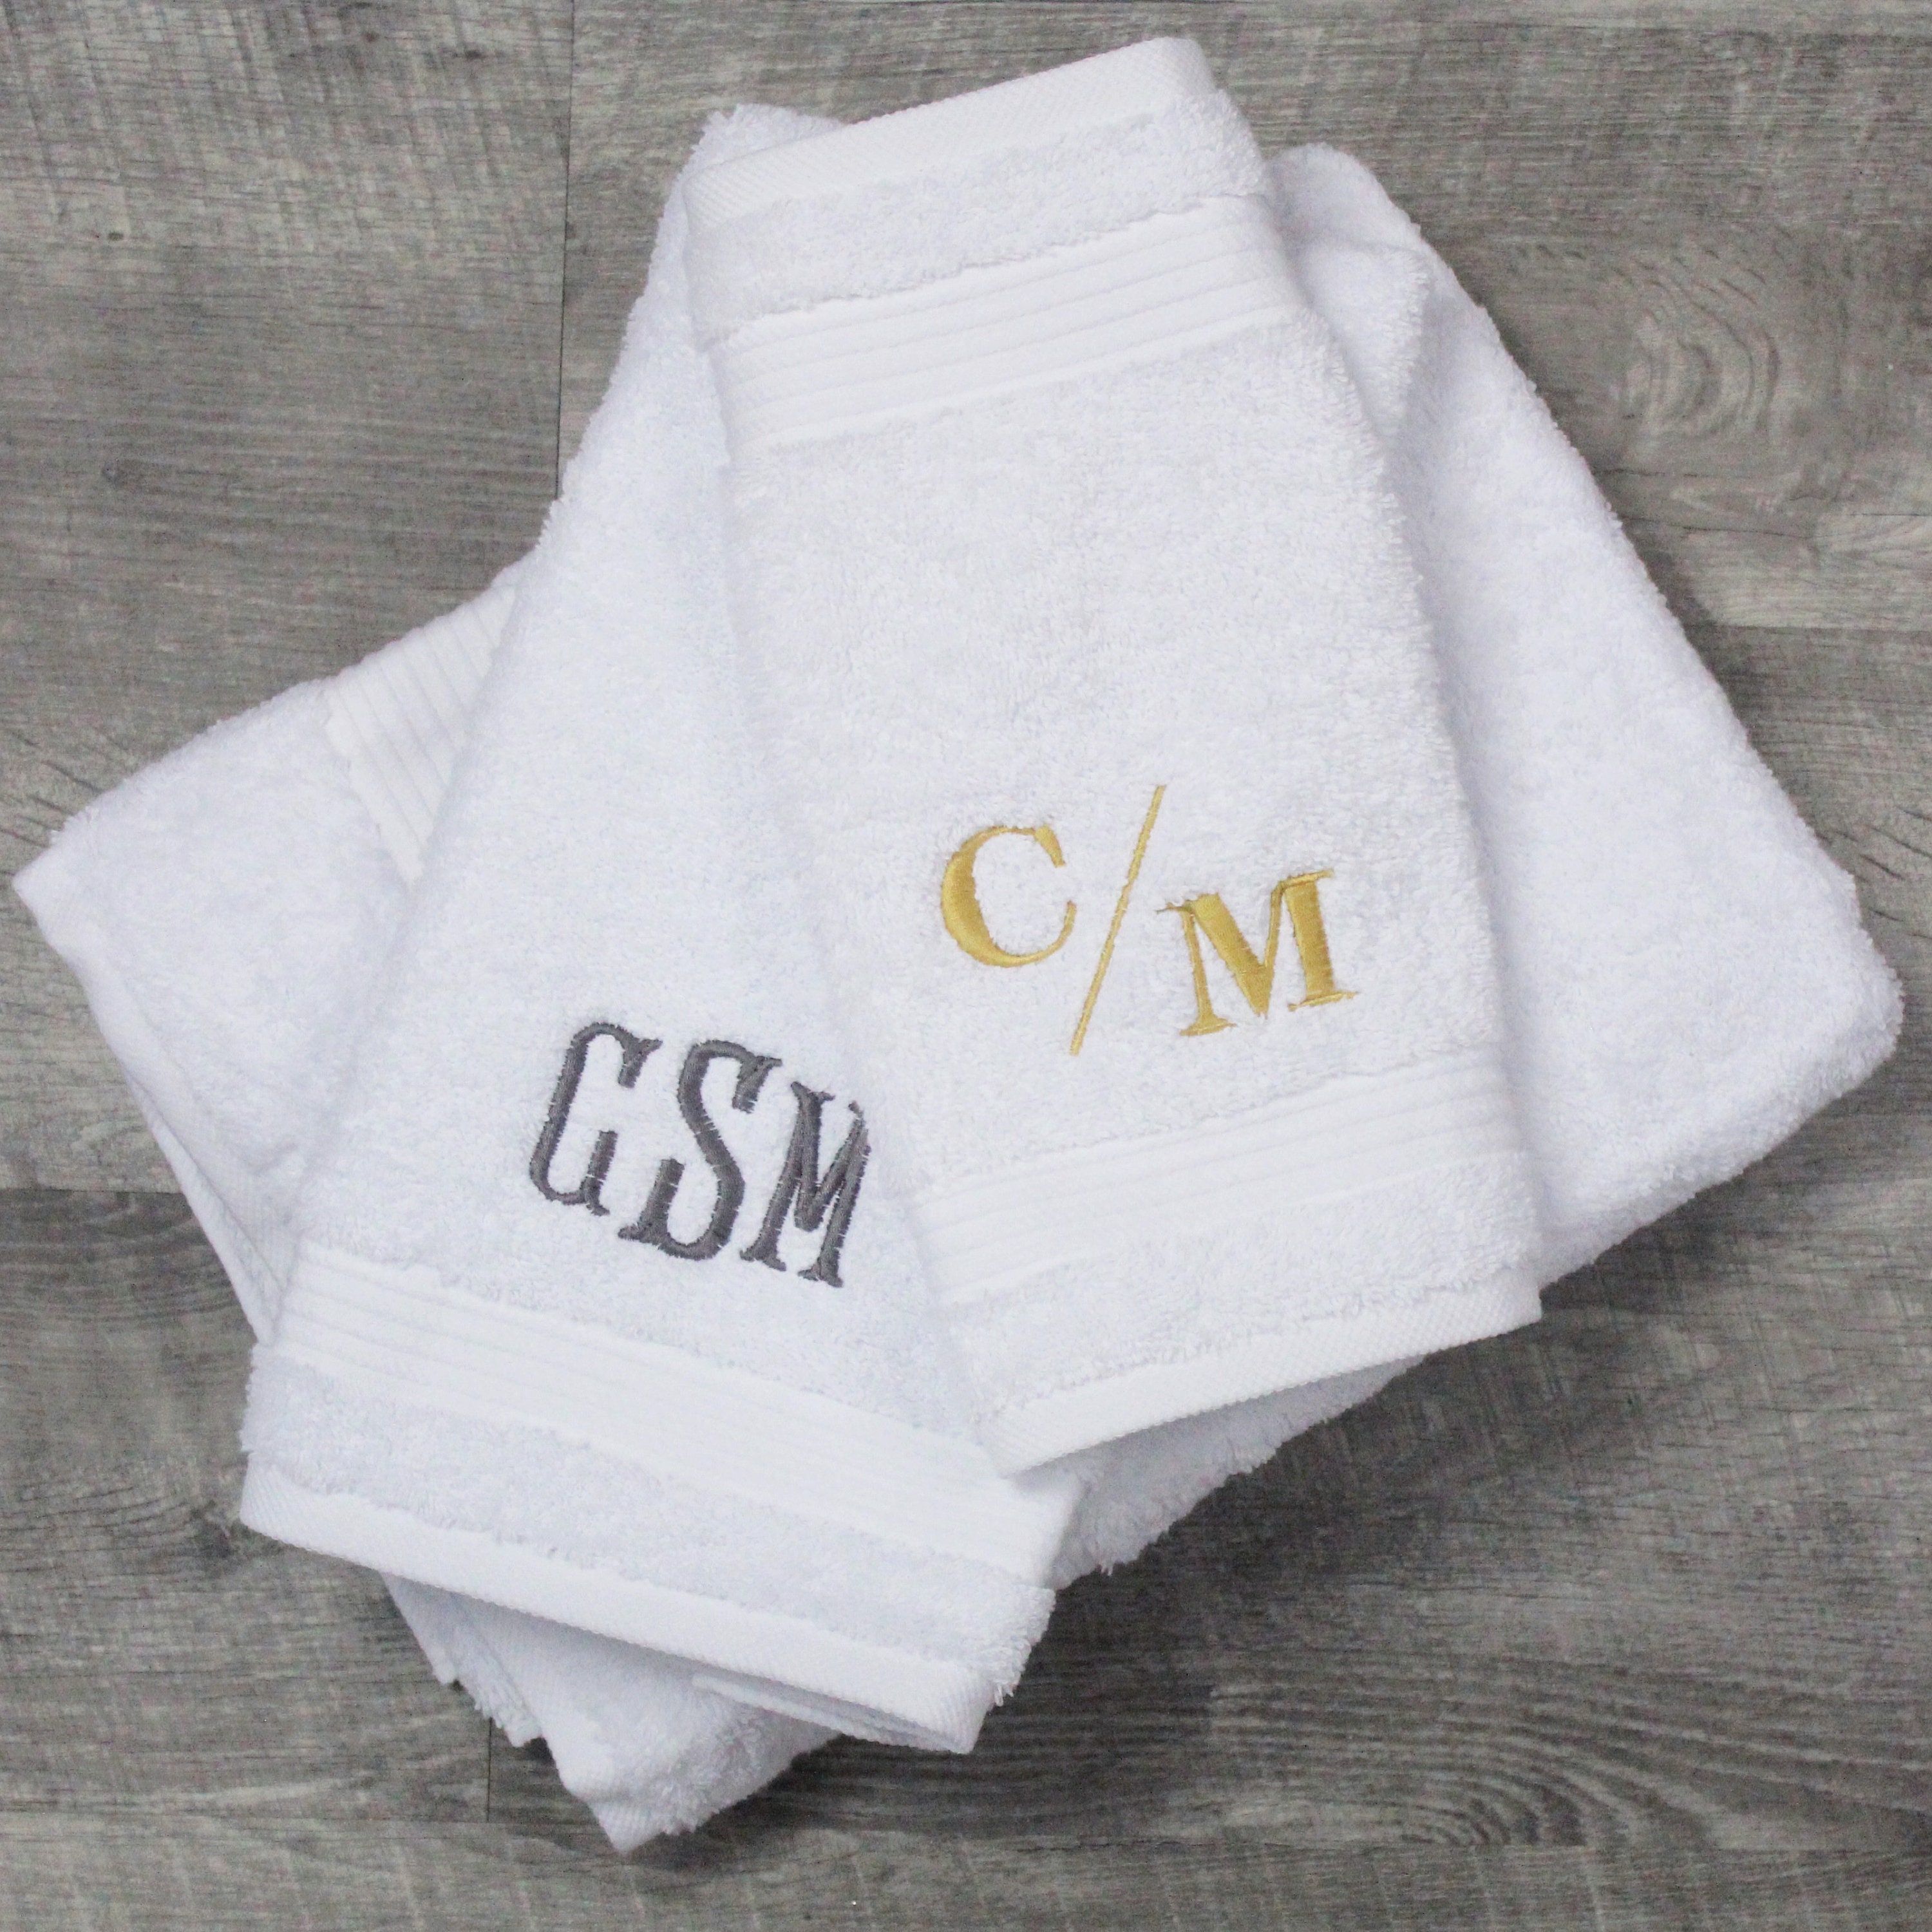 5 Star Hotel Luxury Embroidery White Monogrammed Hand Towels Set 100%  Cotton Large Beach Towel Brand Absorbent Quick Drying Bathroom Towel From  Renara, $49.58